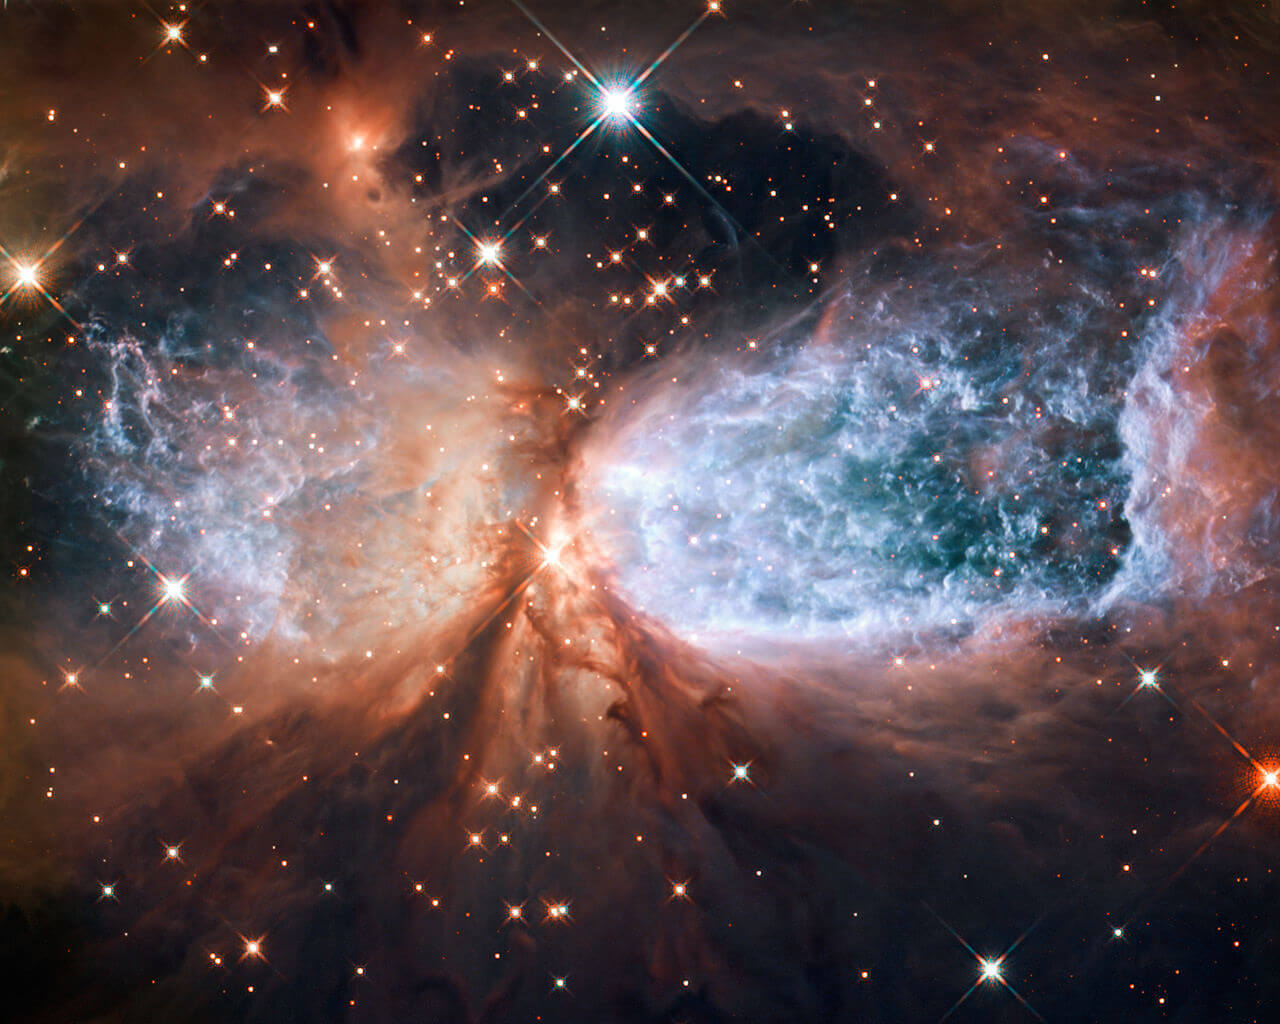 space is so cool - hubble pictures 6 (1)